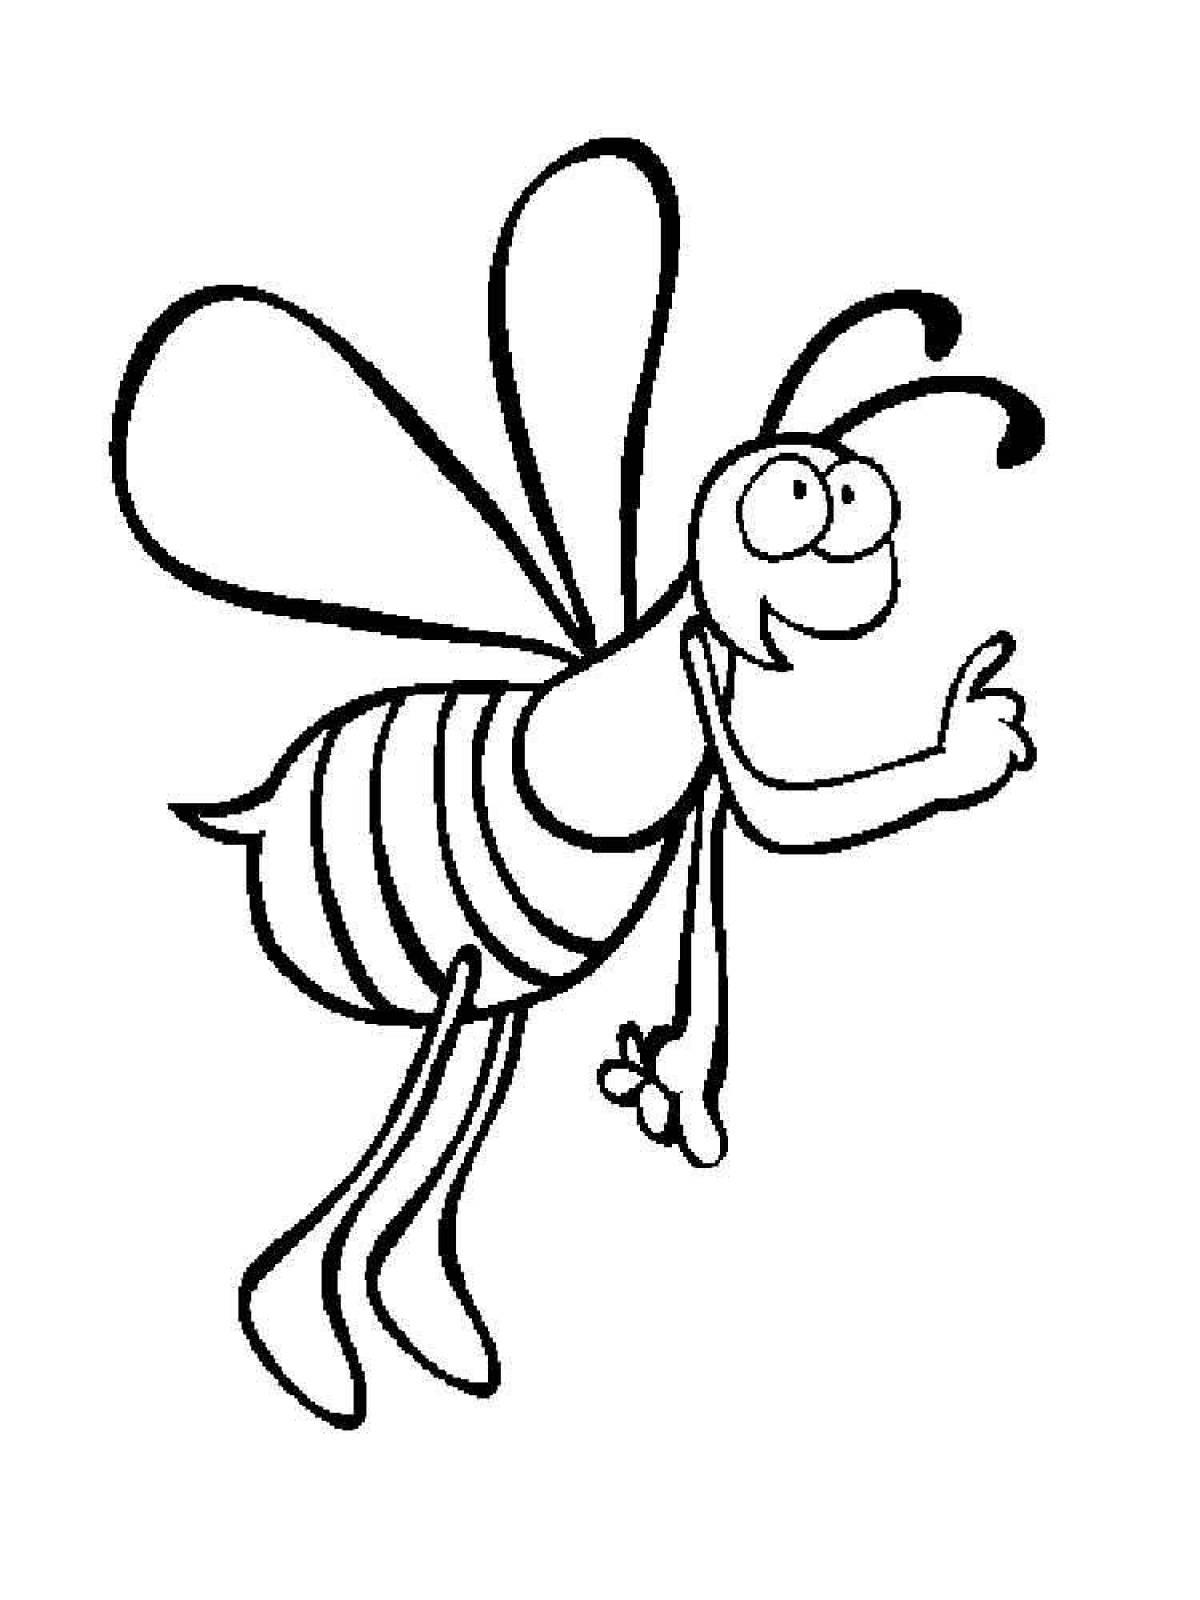 Adorable wasp coloring page